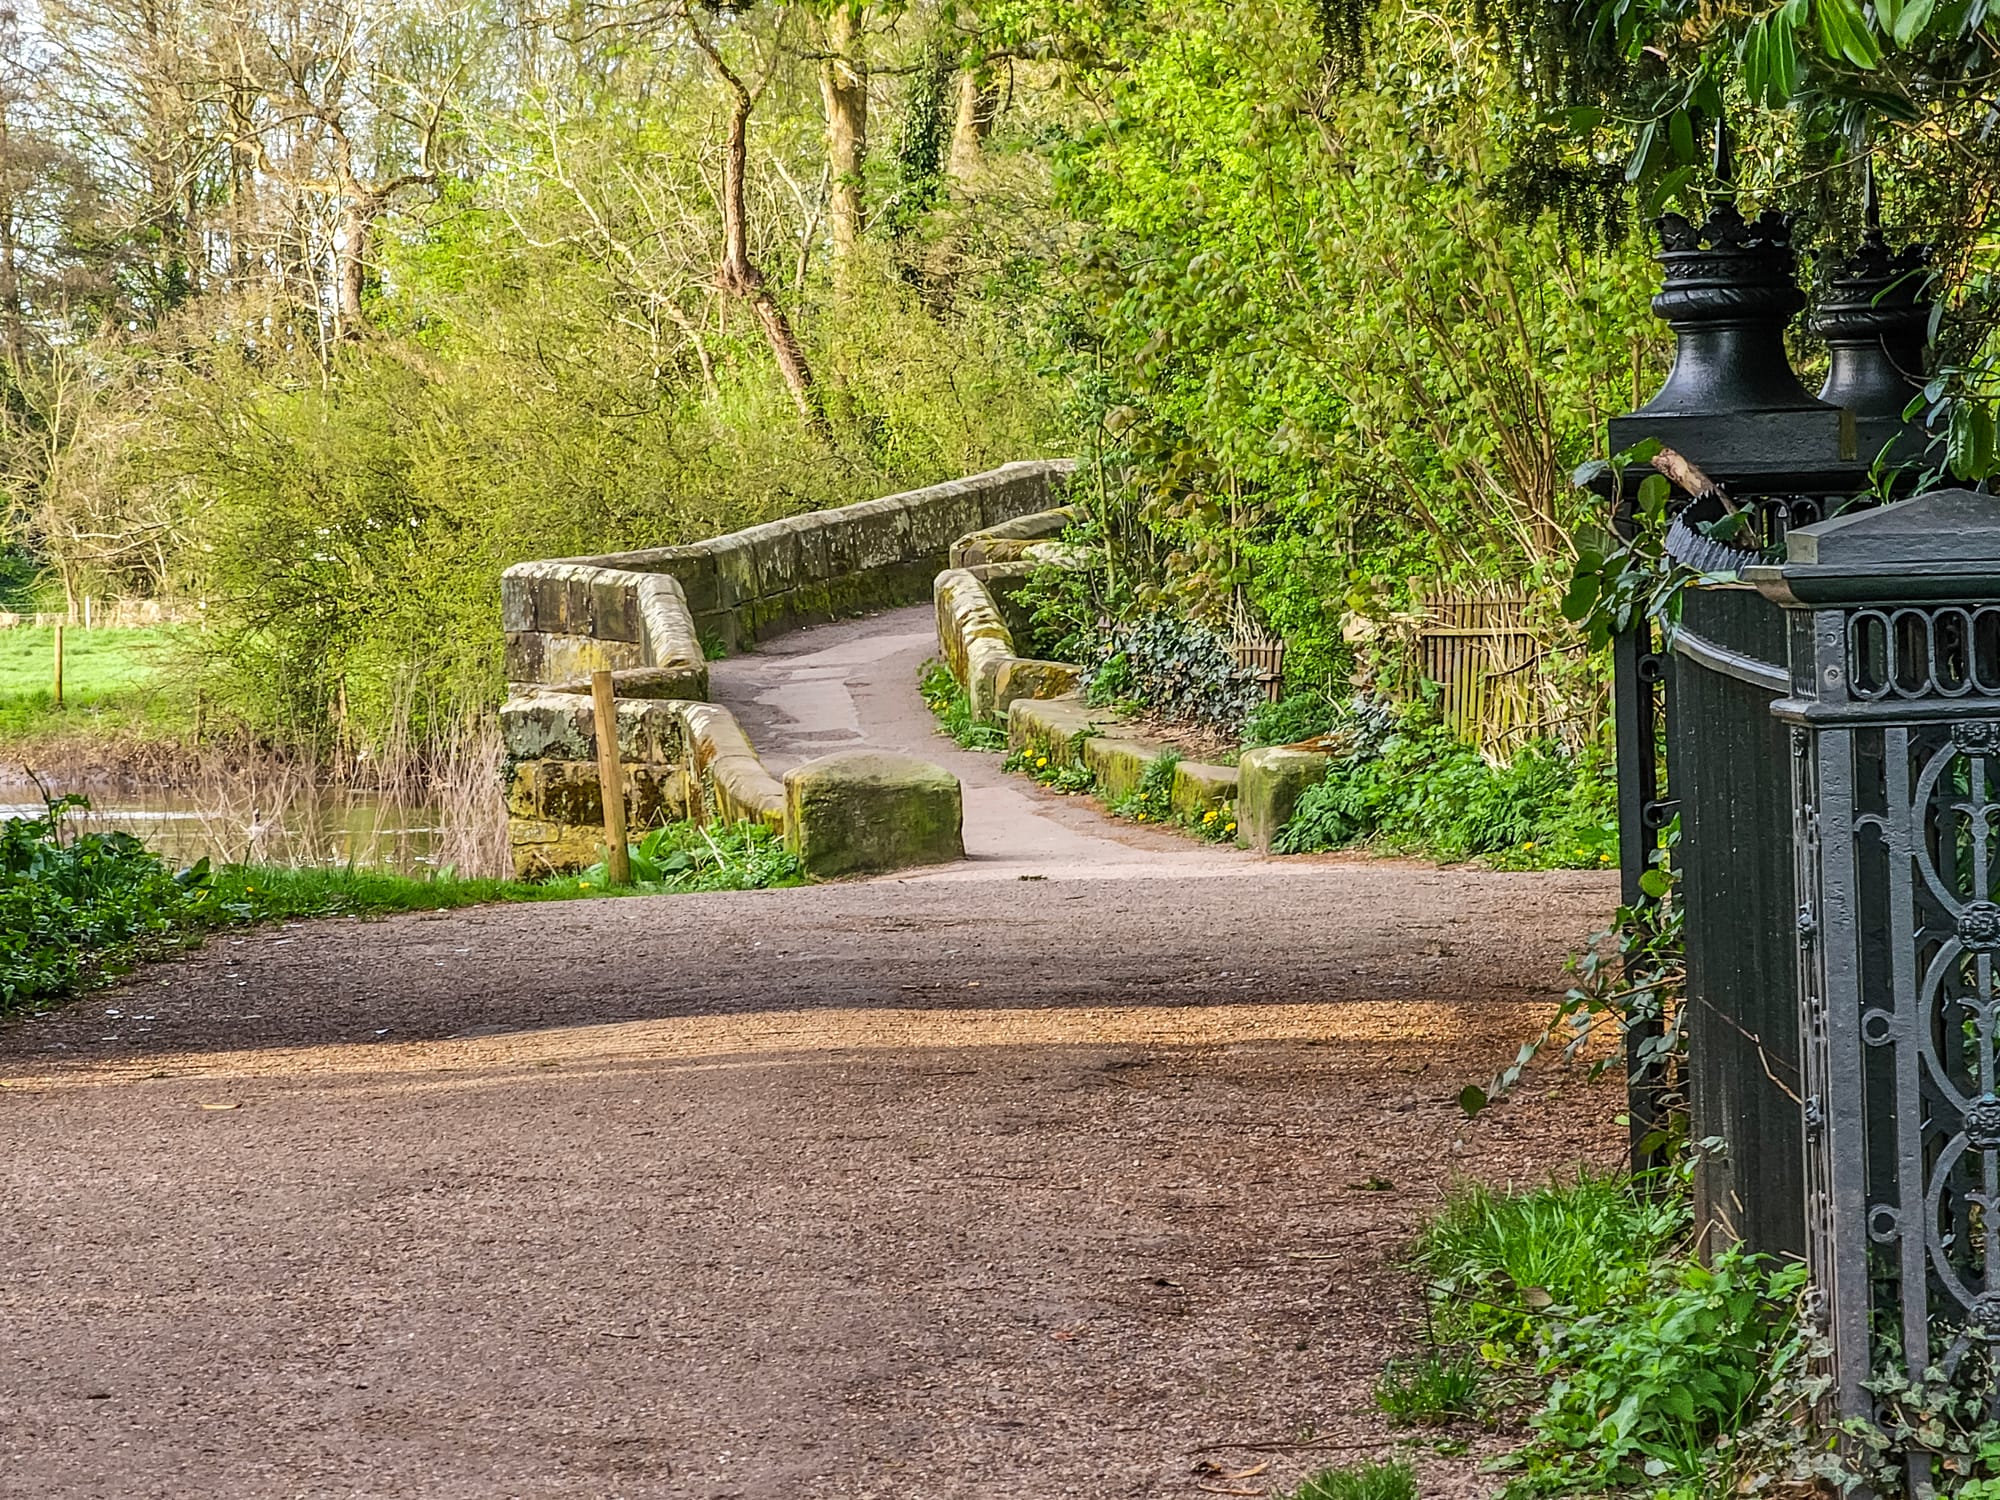 From Royalty to Tolkien: The Story of Essex Bridge in Staffordshire